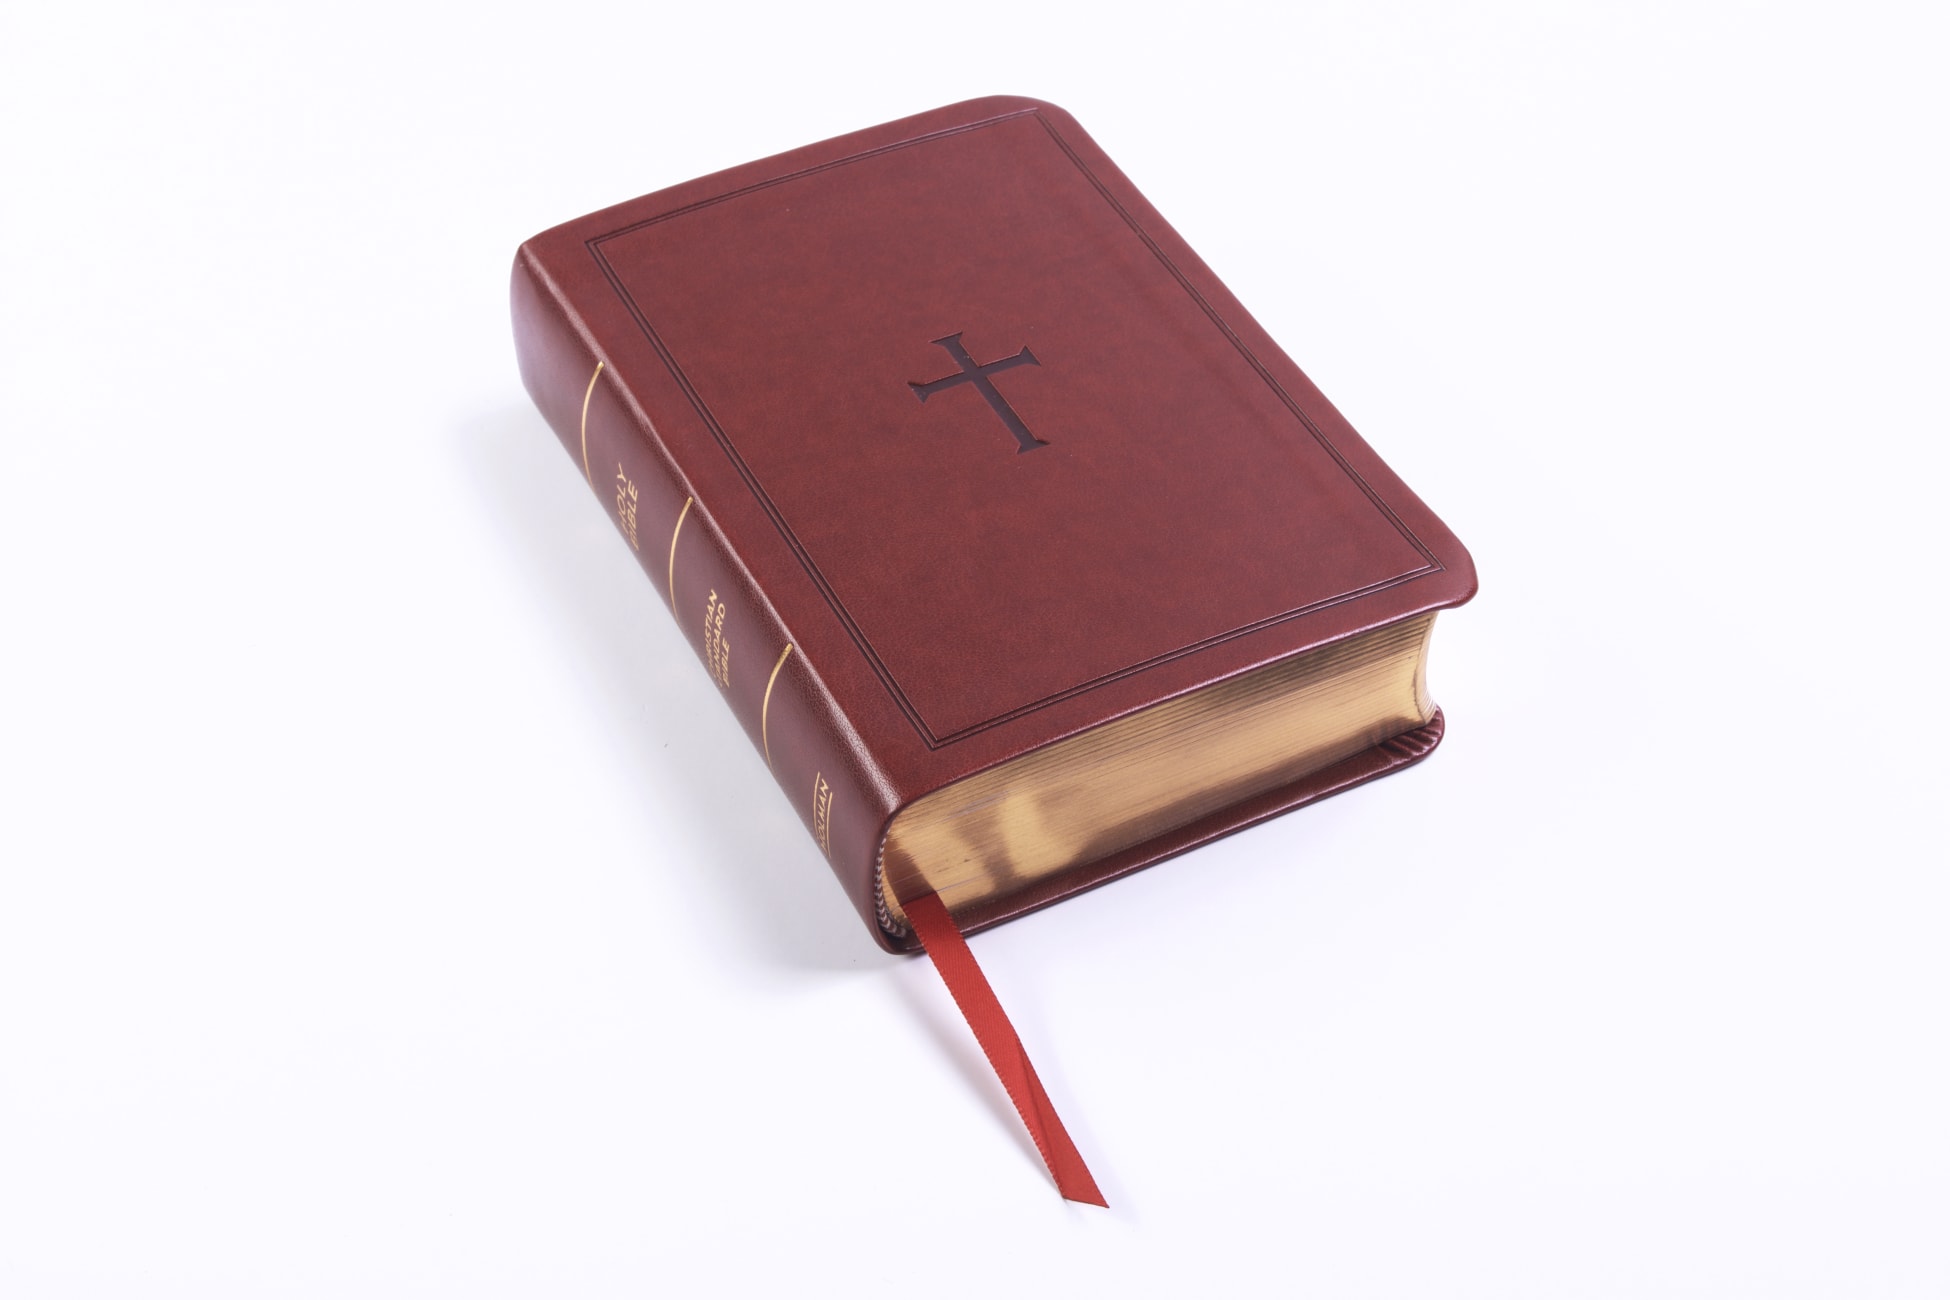 CSB Large Print Compact Reference Bible Brown Indexed Red Letter Edition Imitation Leather